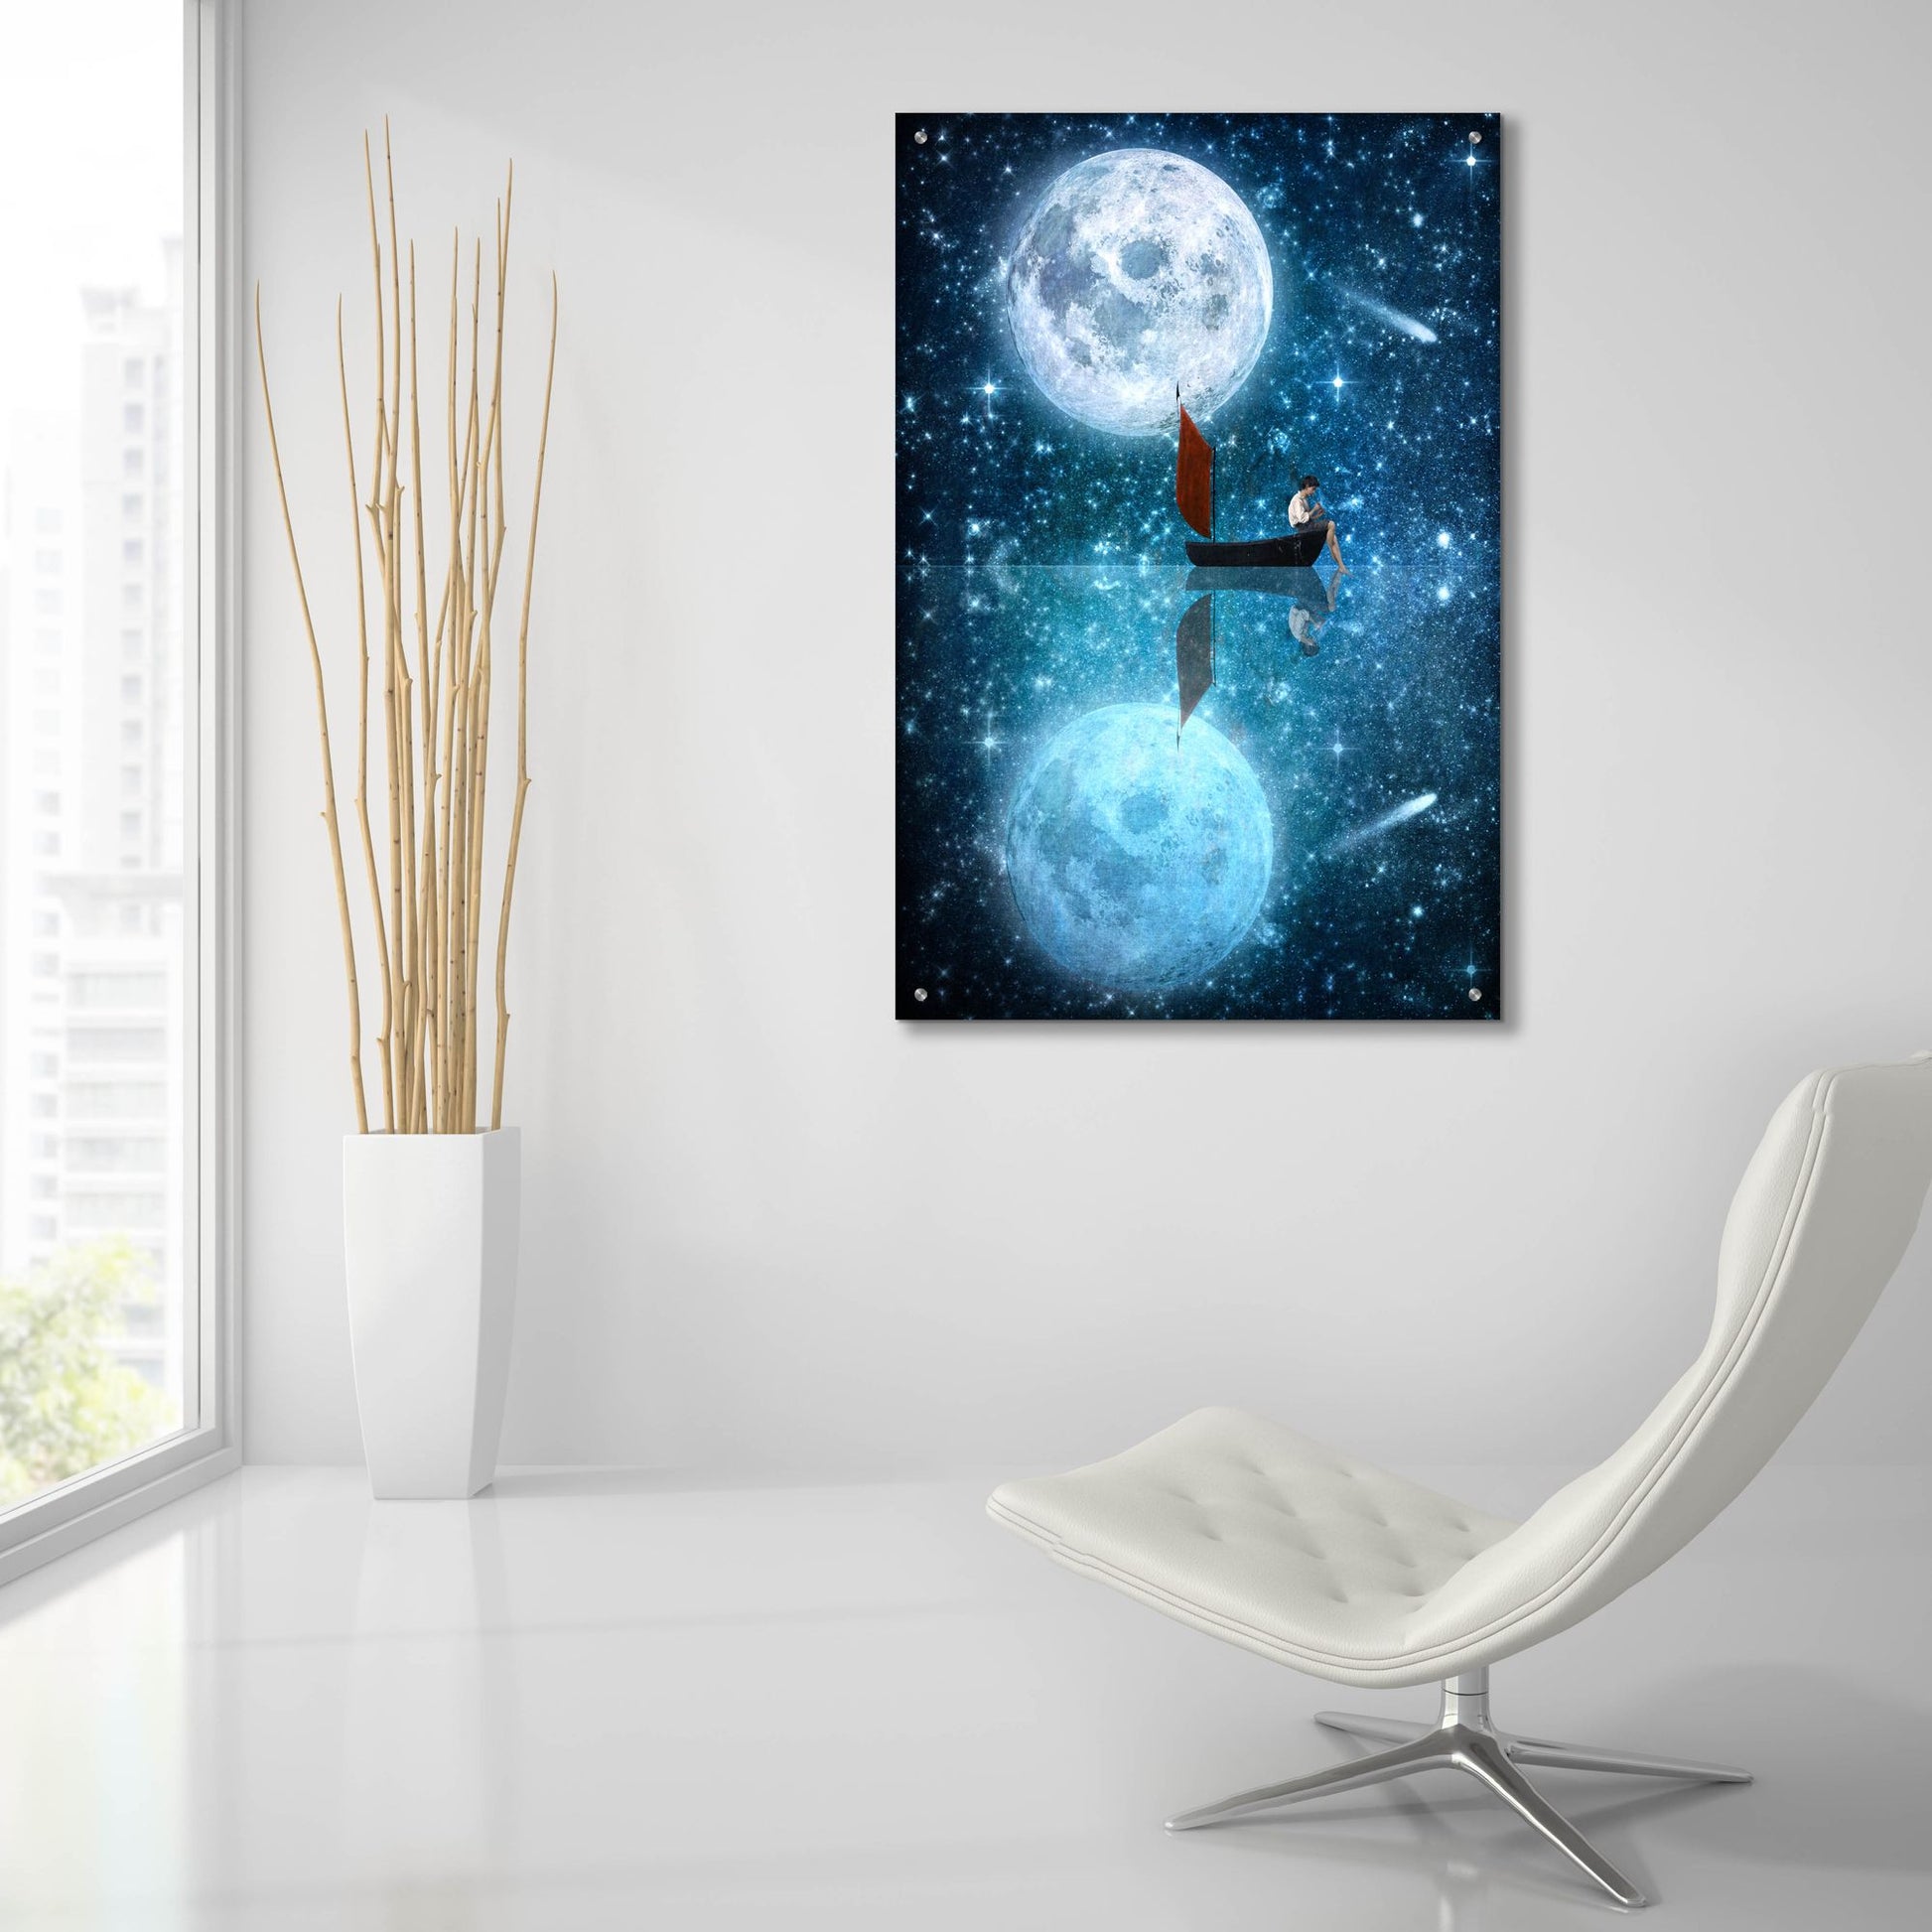 Epic Art 'The Moon And Me' by Diogo Verissimo, Acrylic Glass Wall Art,24x36